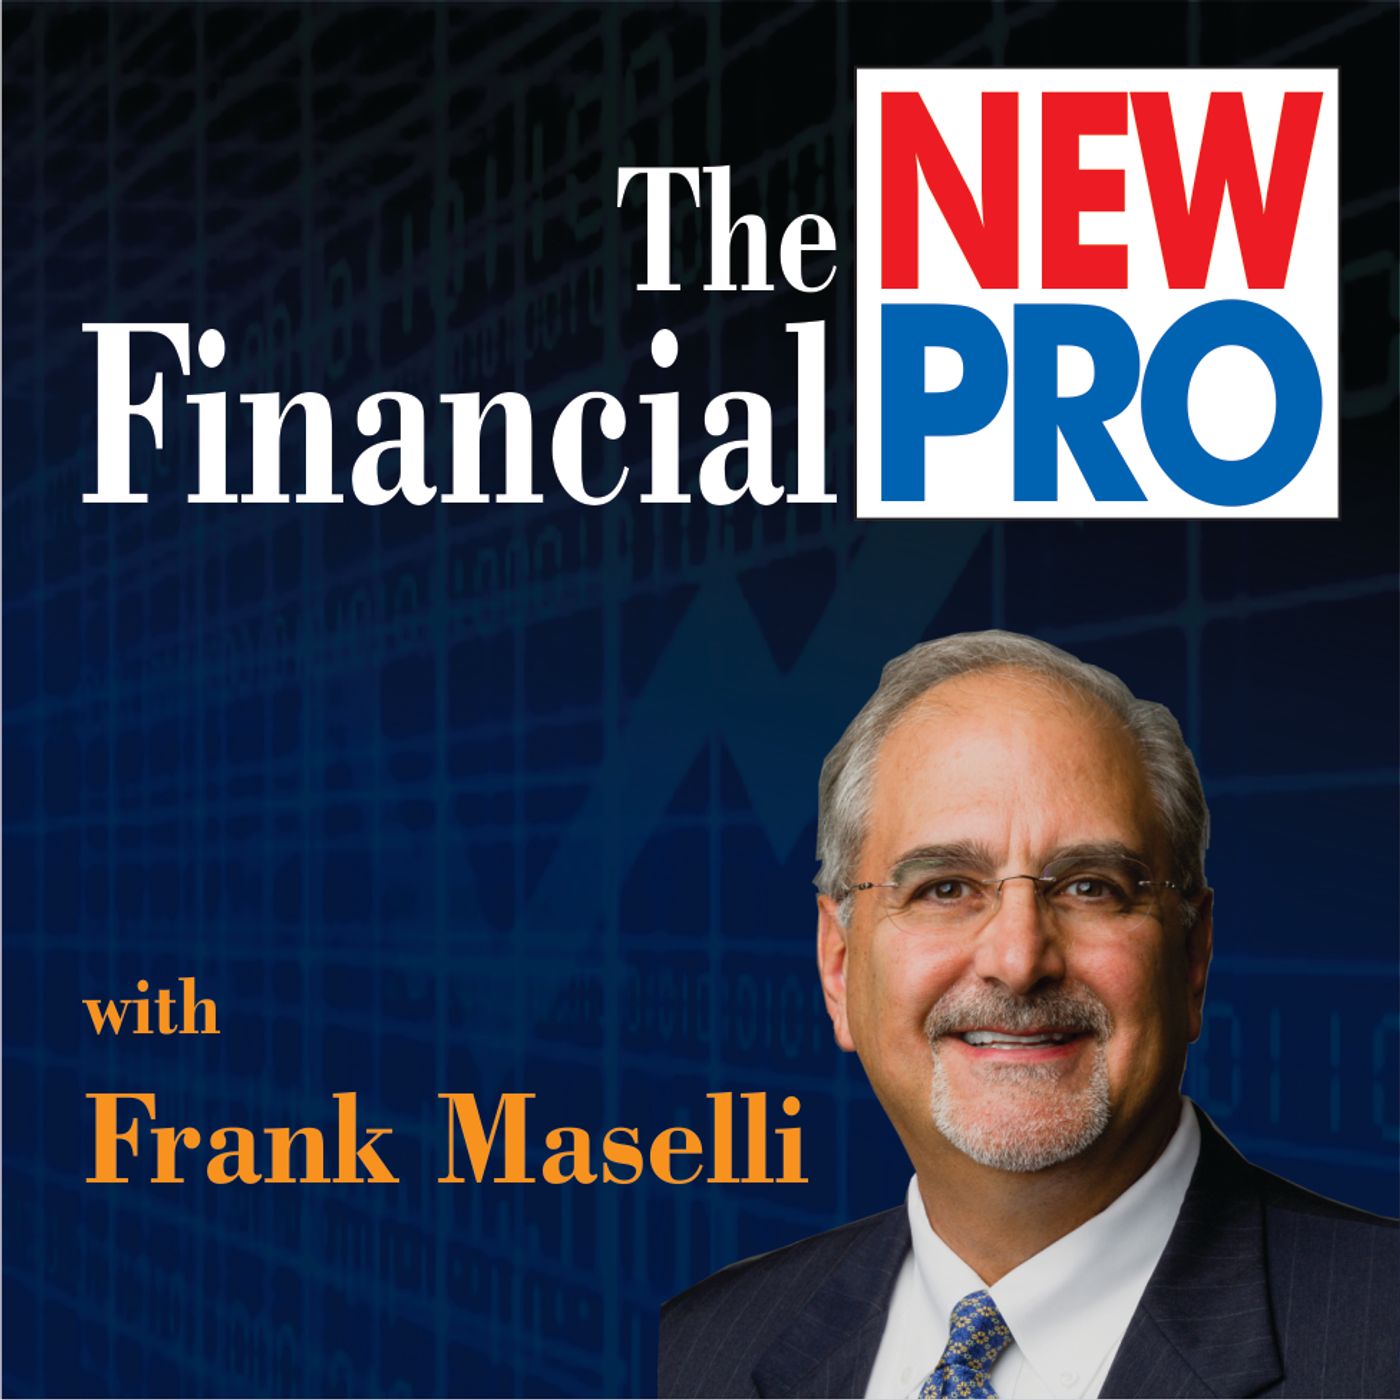 The NEW Financial PRO